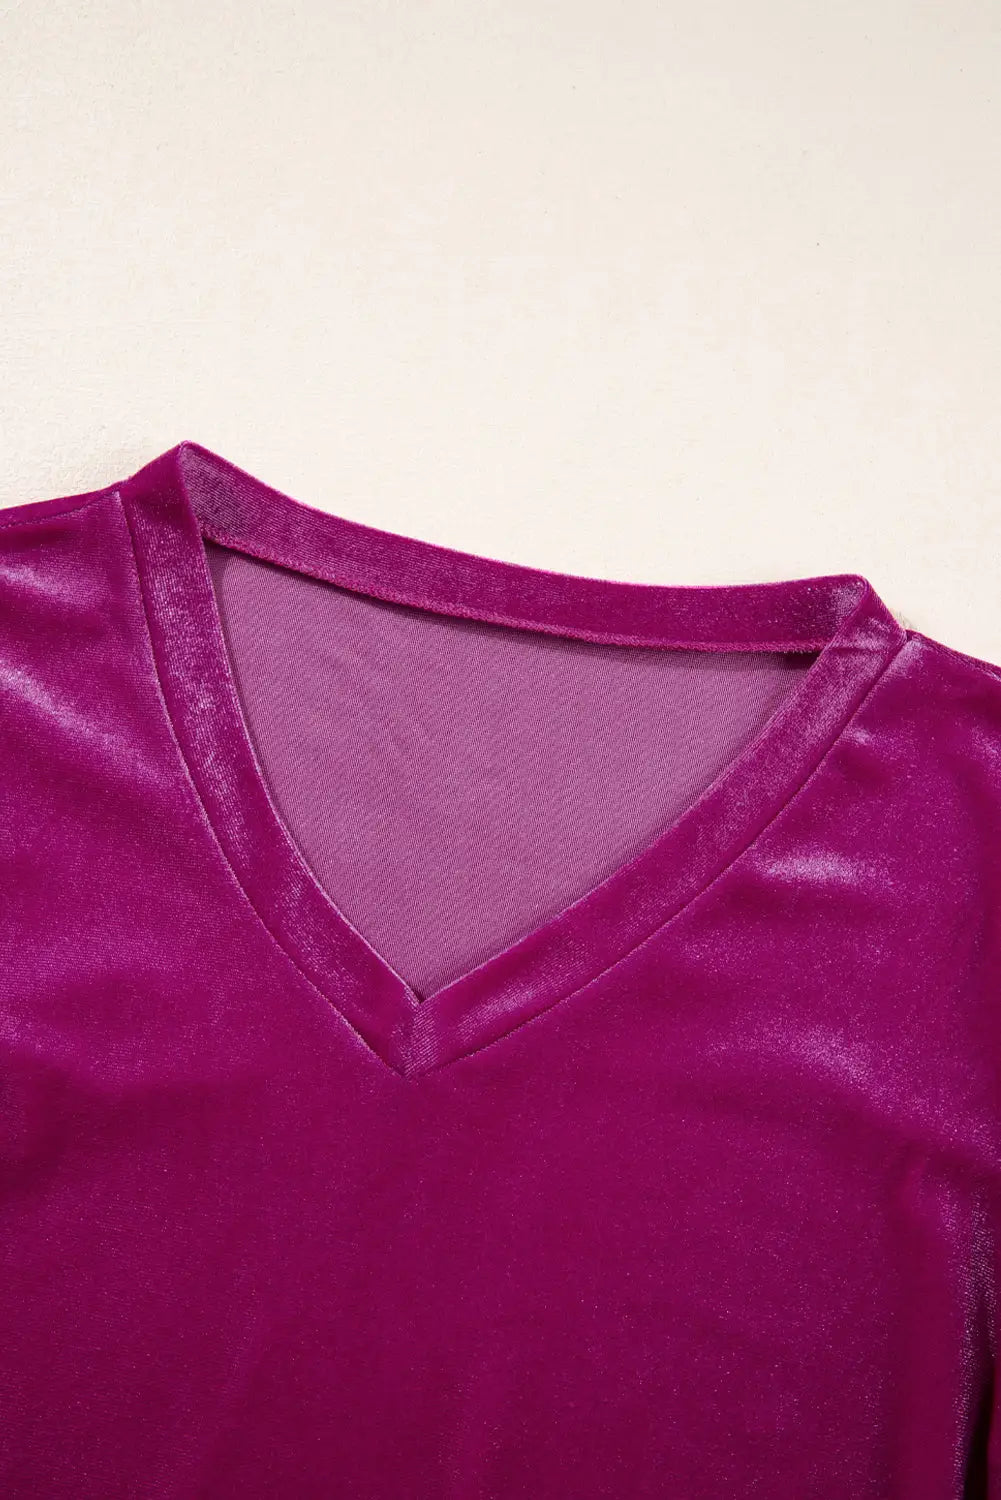 Bright pink pleated velvet top - tops/blouses & shirts